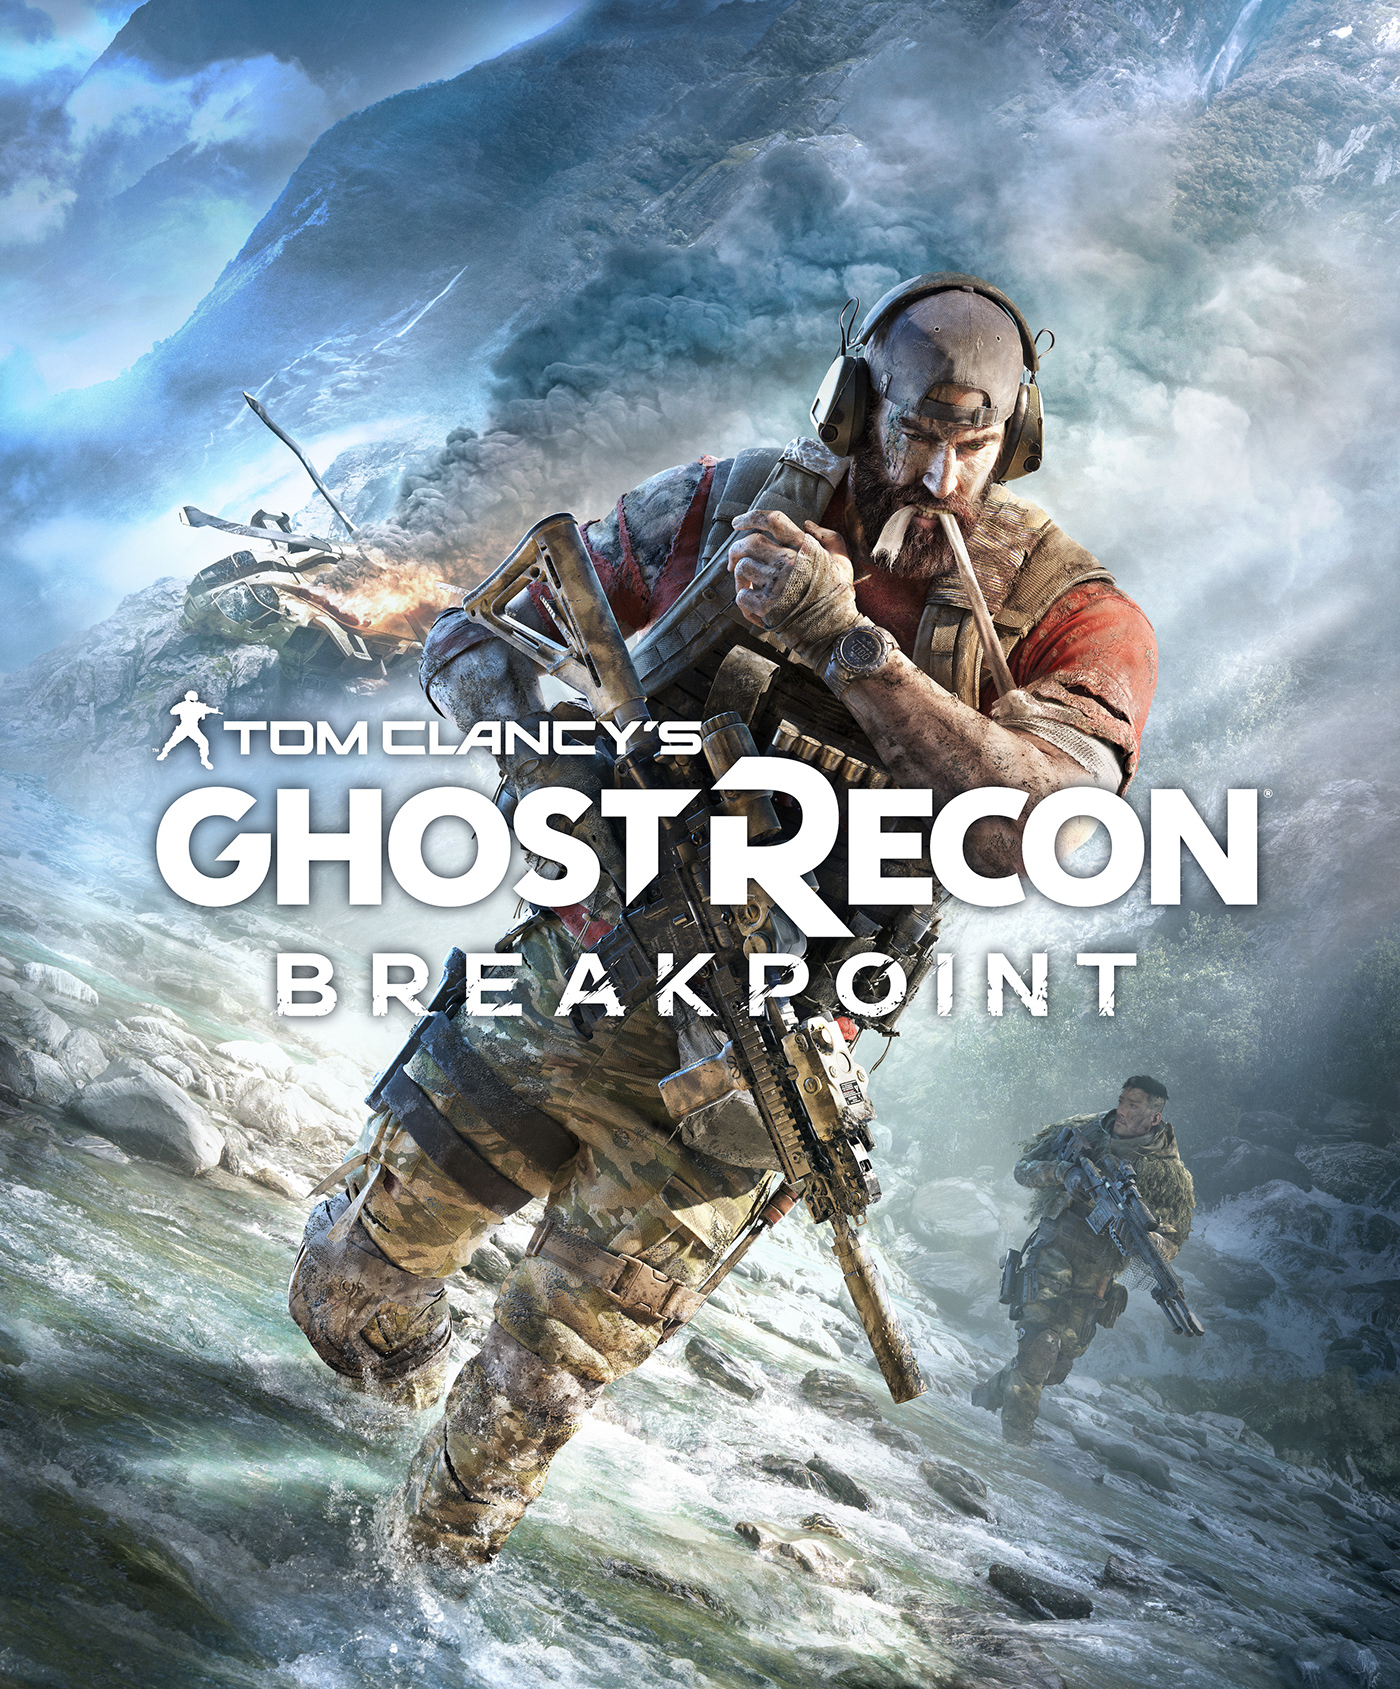 tom clancy ghost recon breakpoint gameplay